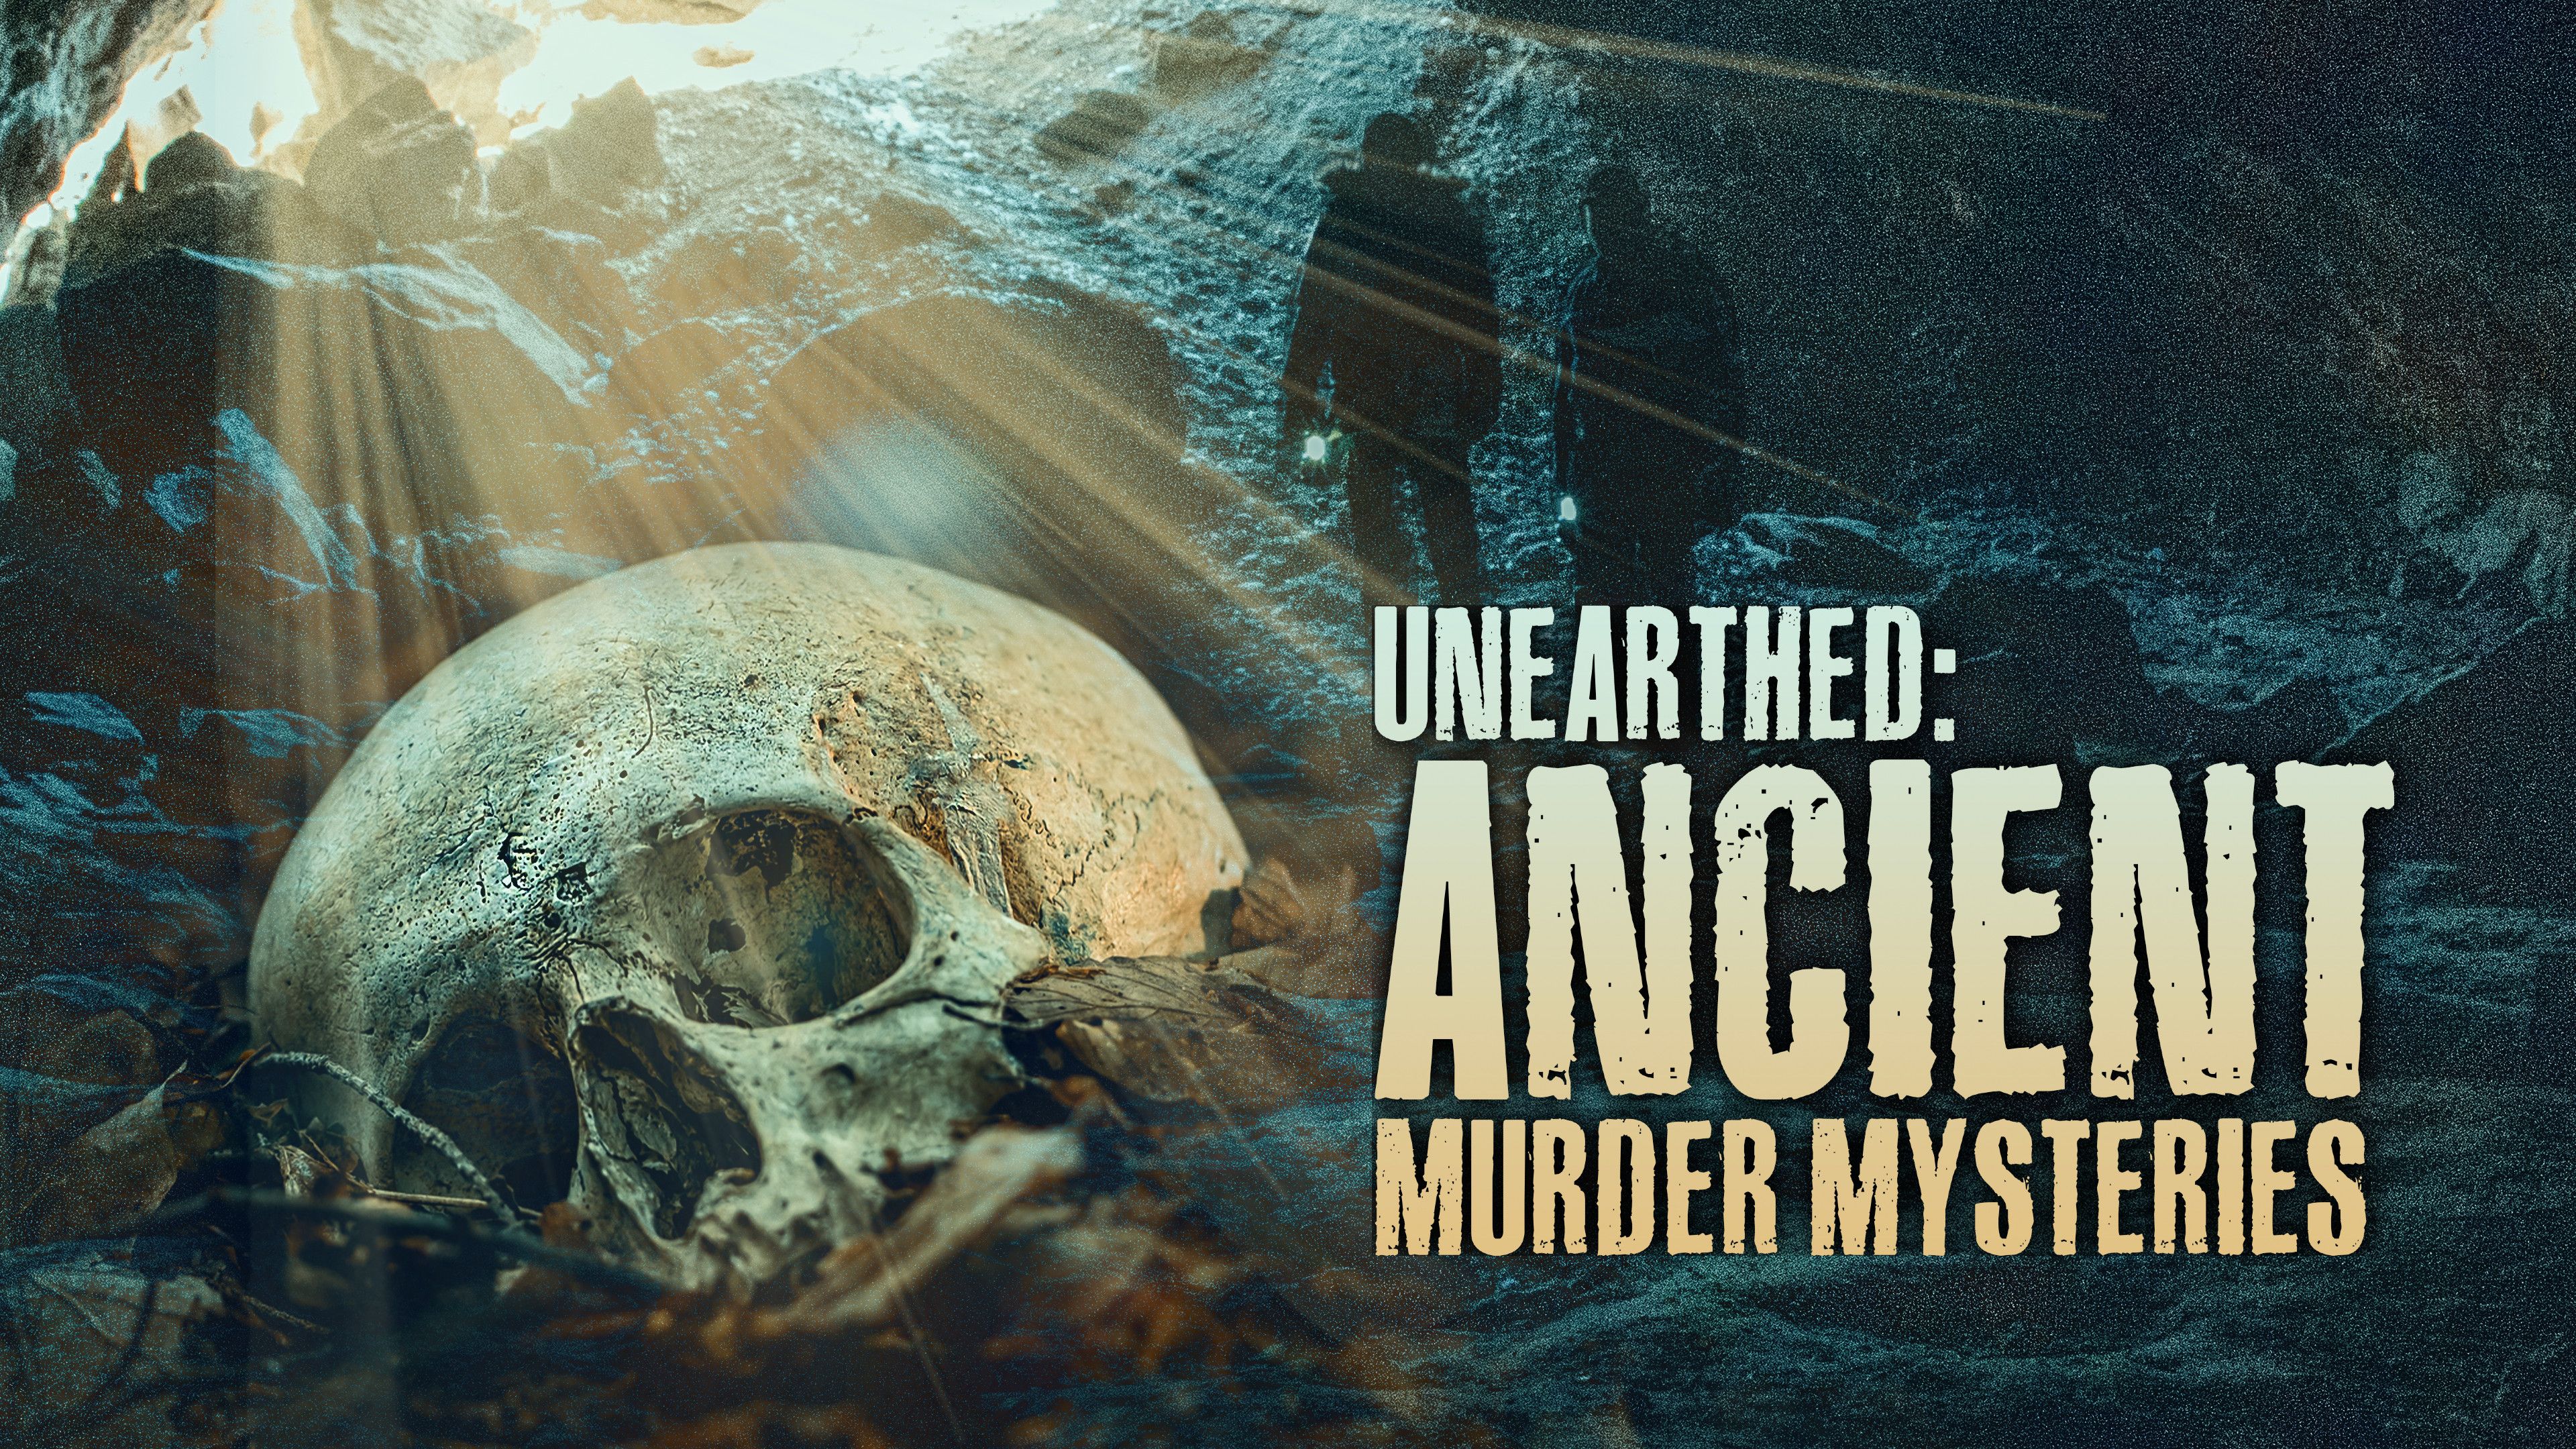 Unearthed: Ancient Murder Mysteries